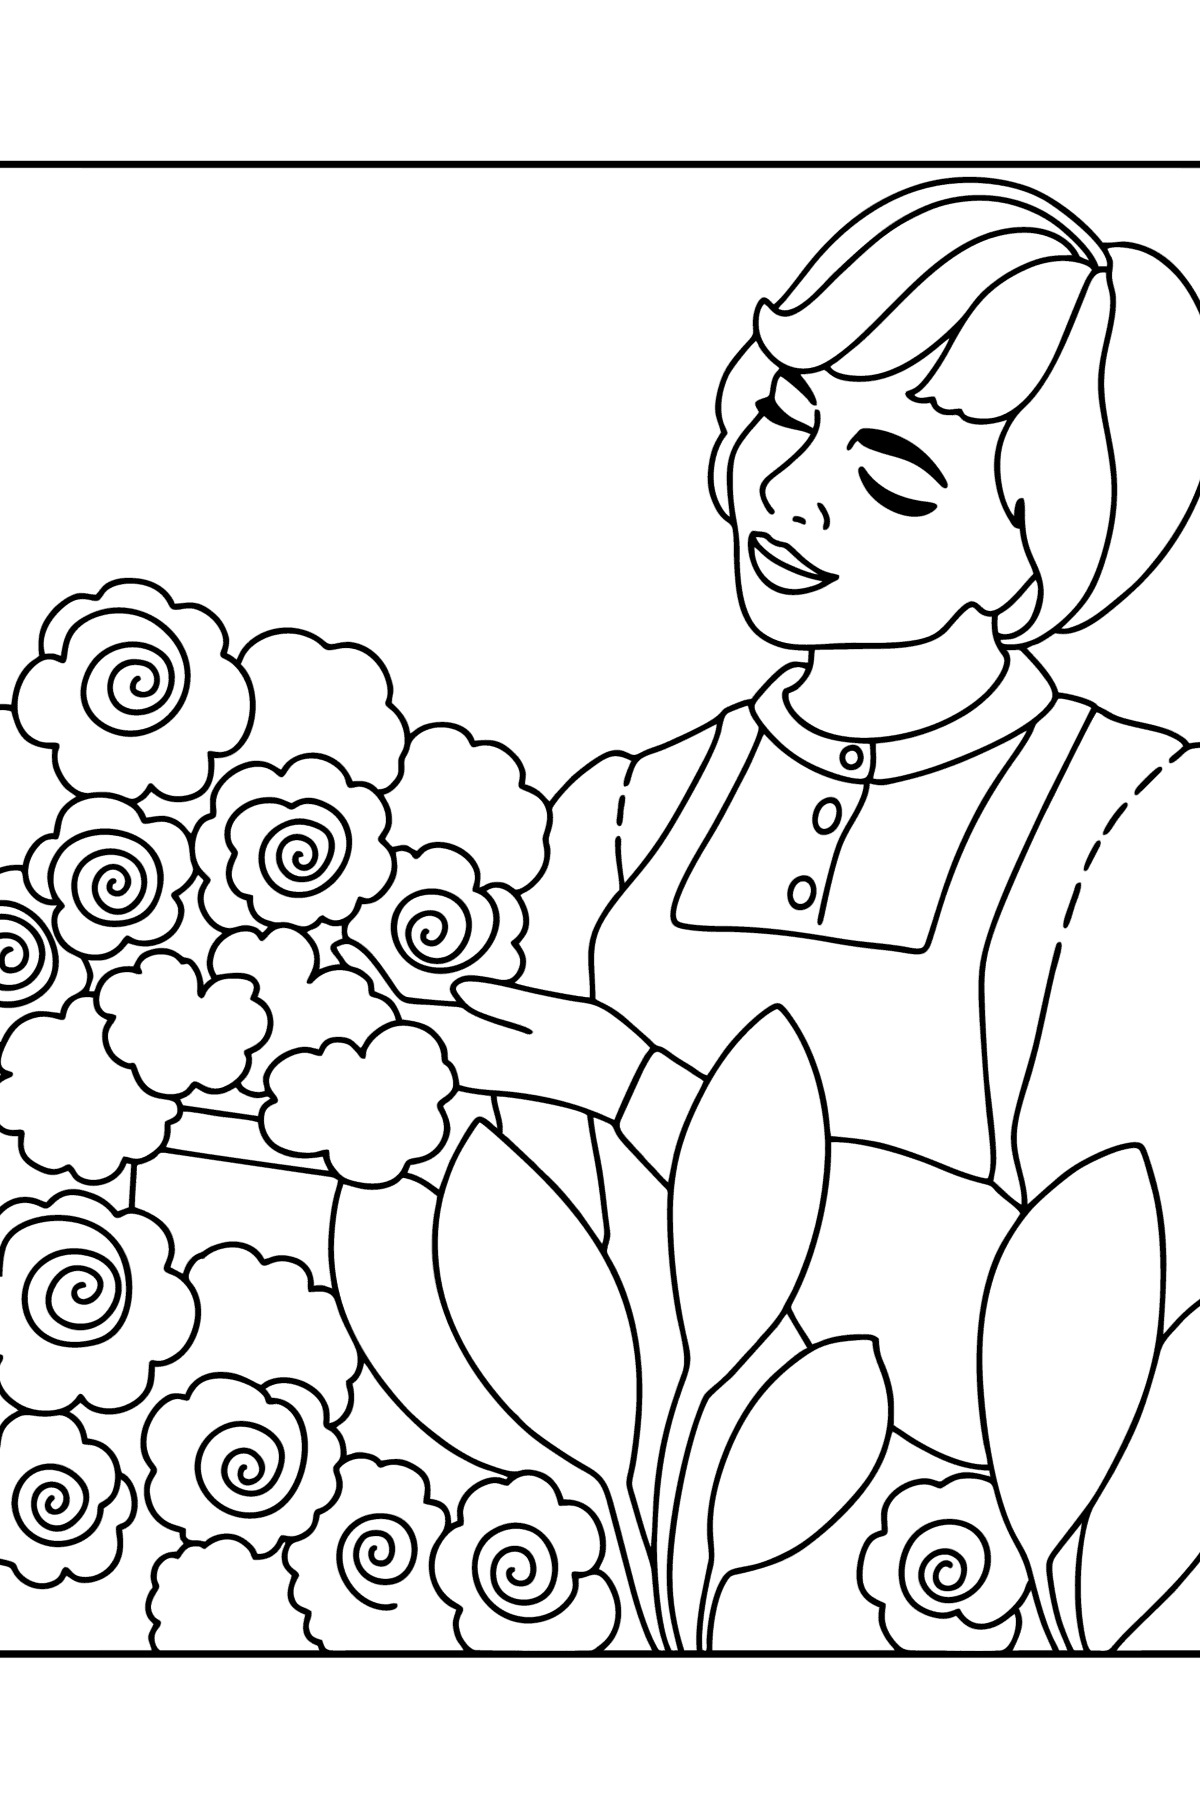 Florist сoloring page - Coloring Pages for Kids